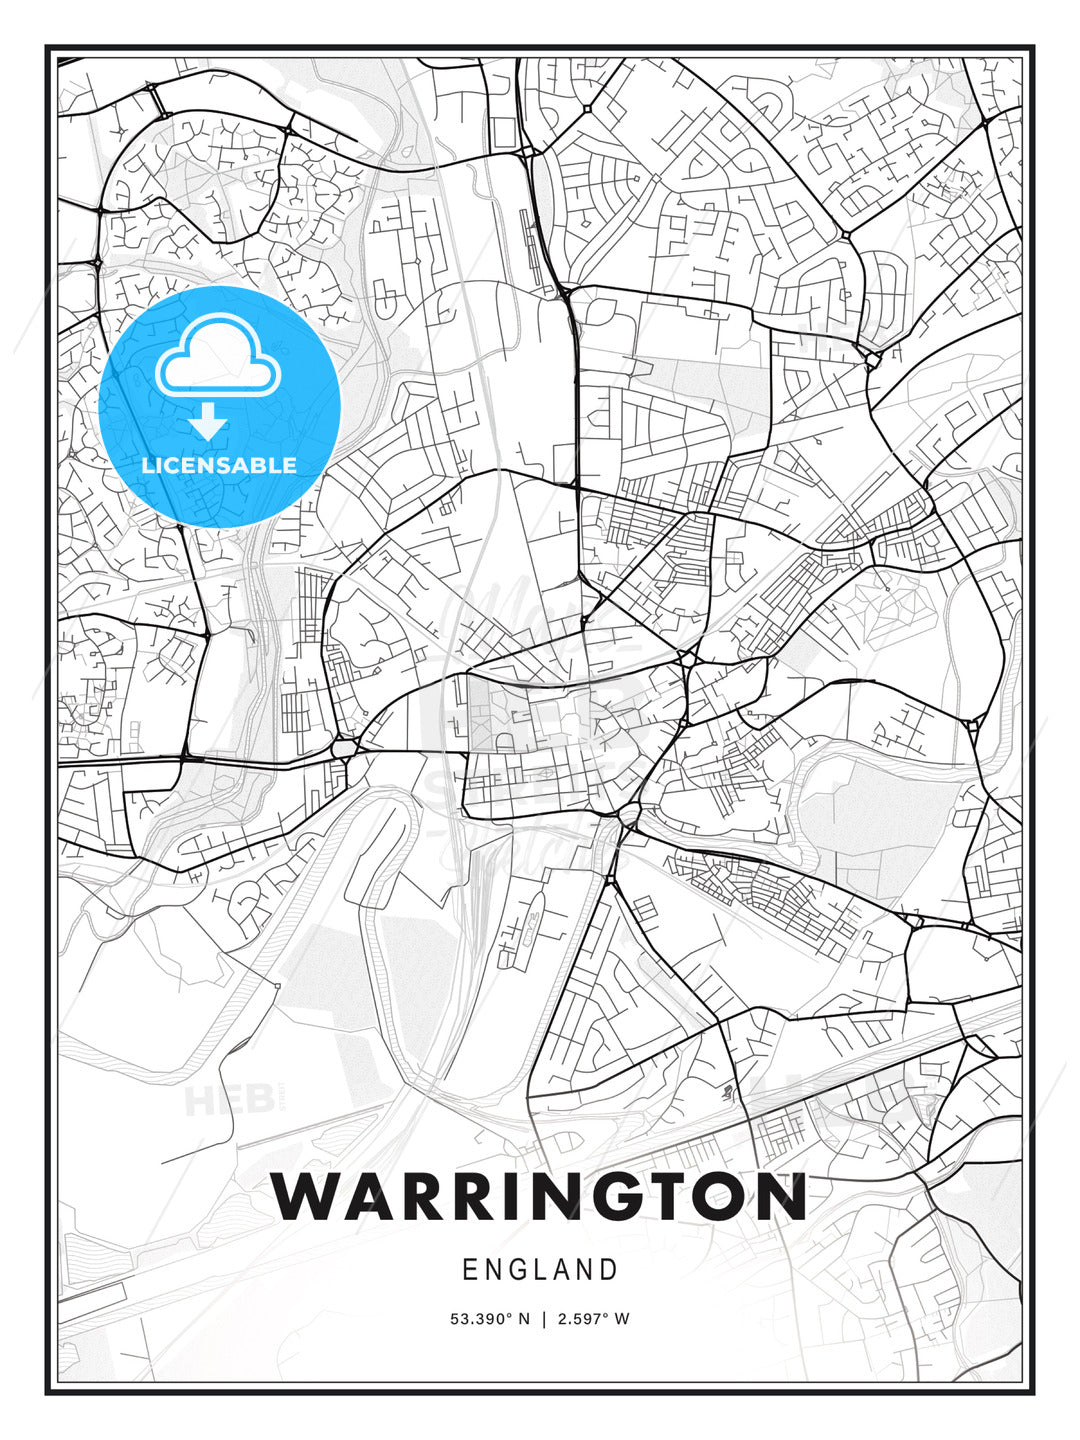 Warrington, England, Modern Print Template in Various Formats - HEBSTREITS Sketches